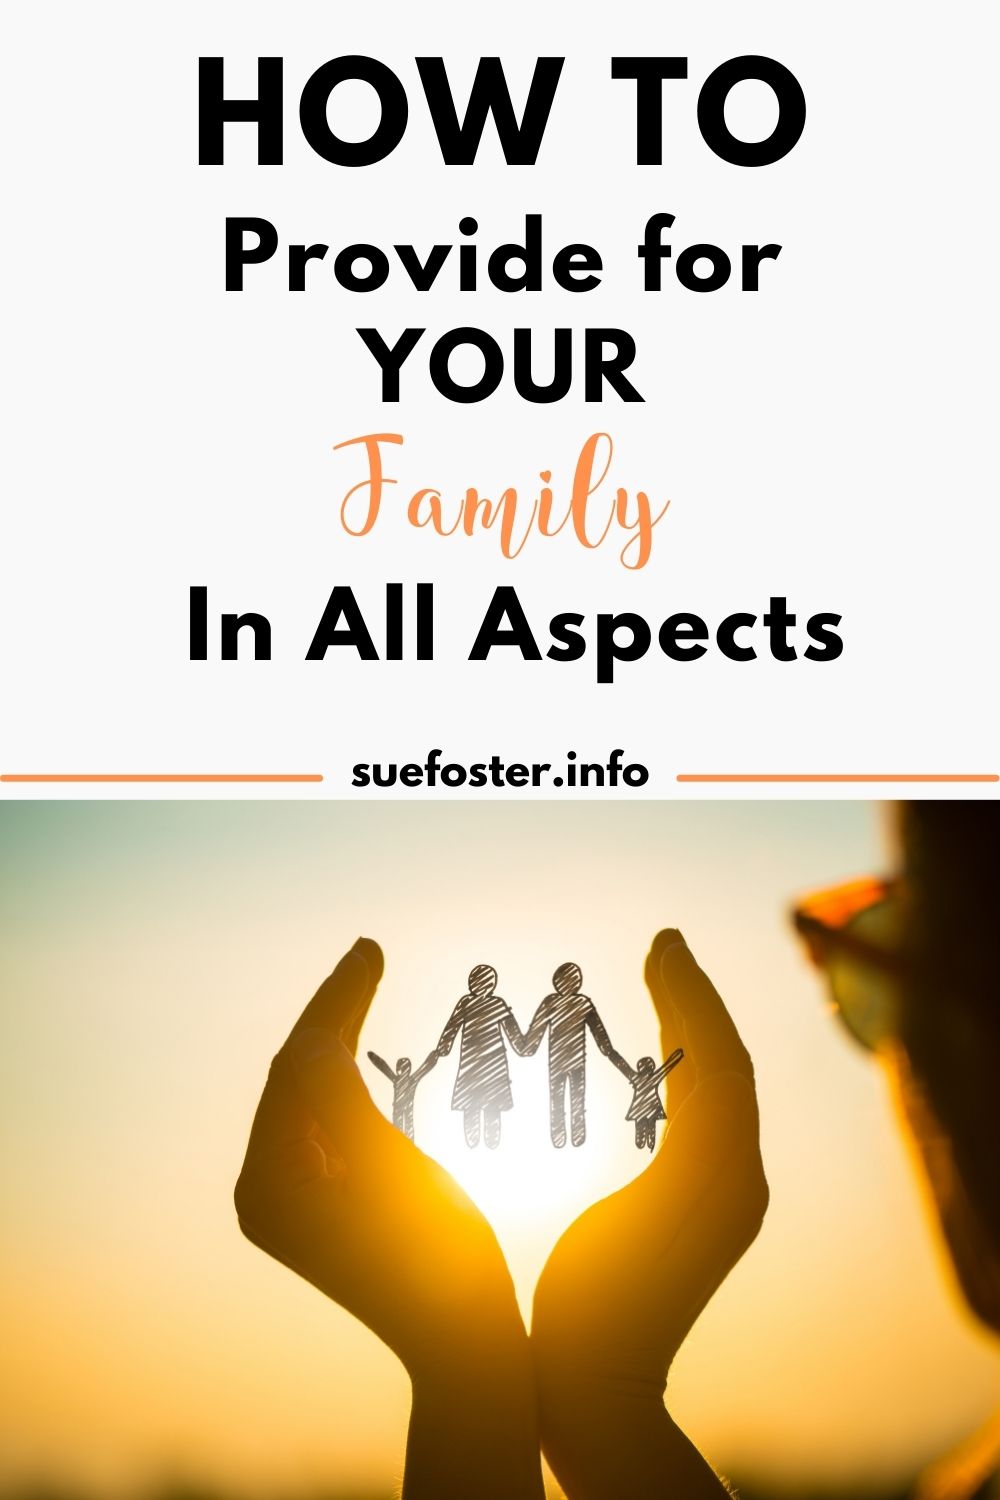 Providing for your family a major responsibility, so in this article, we take a look at ways to make it easier for you.